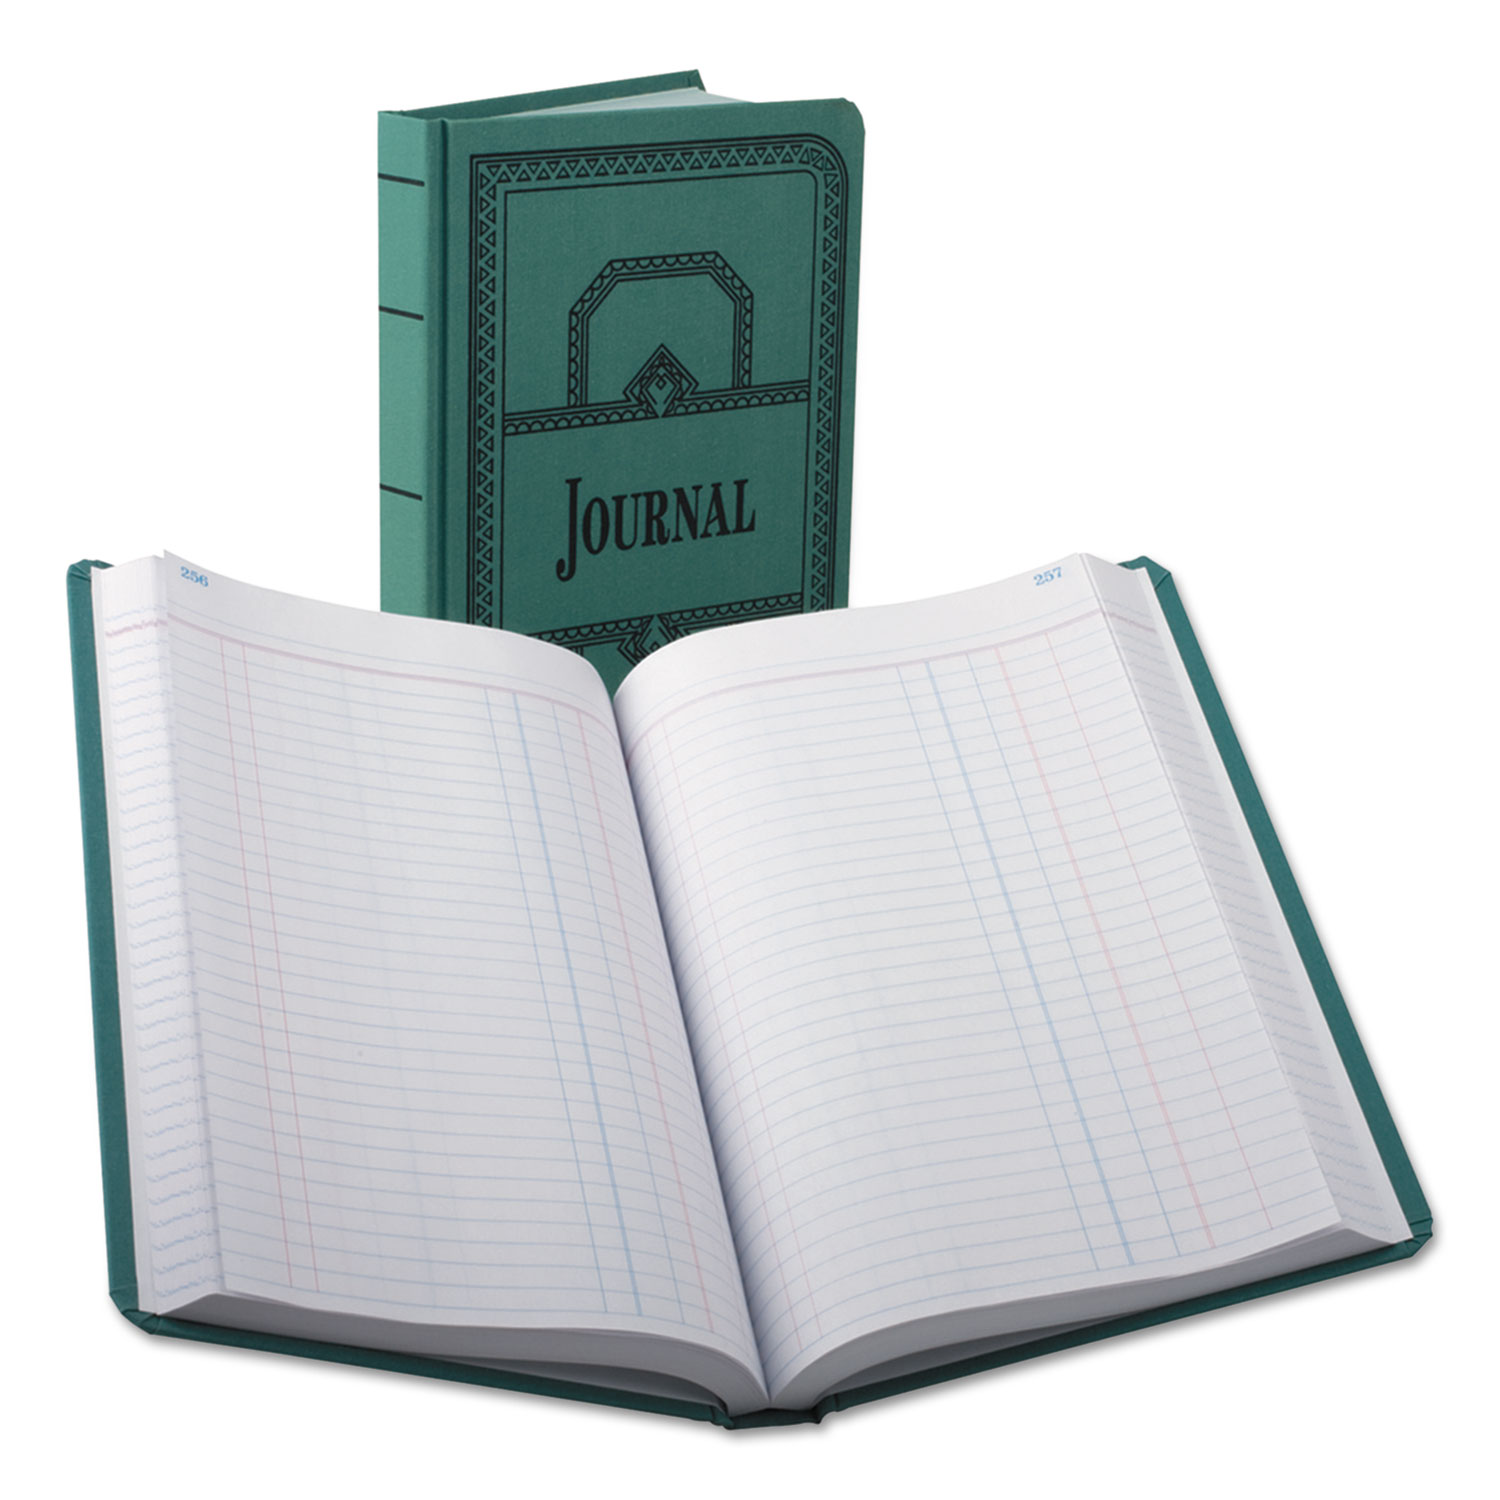  Boorum & Pease 66-500-J Record/Account Book, Journal Rule, Blue, 500 Pages, 12 1/8 x 7 5/8 (BOR66500J) 